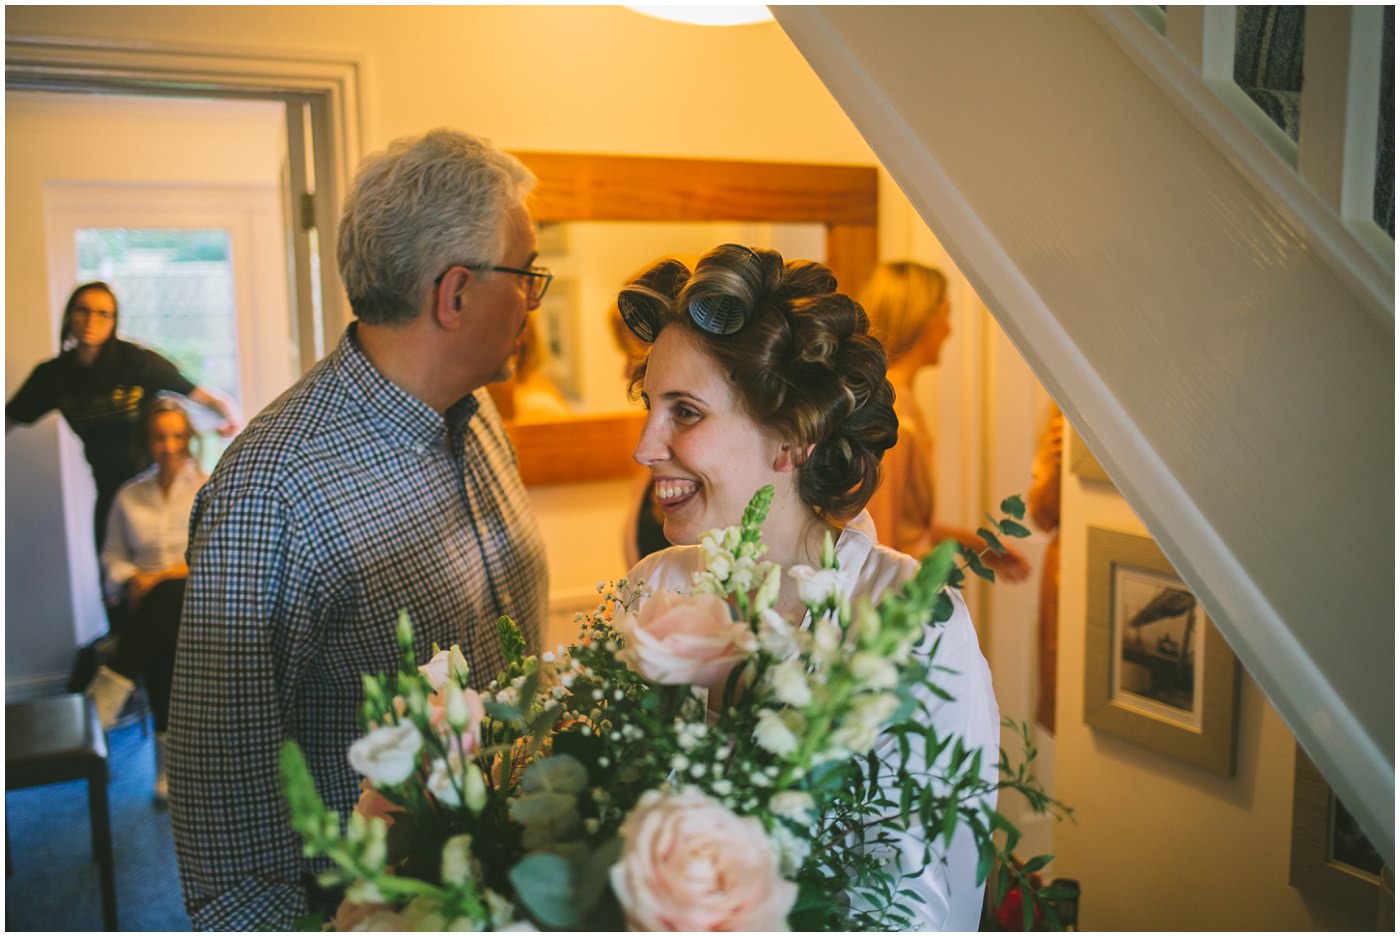 Bride receives a bunch of flowers on the morning of her wedding